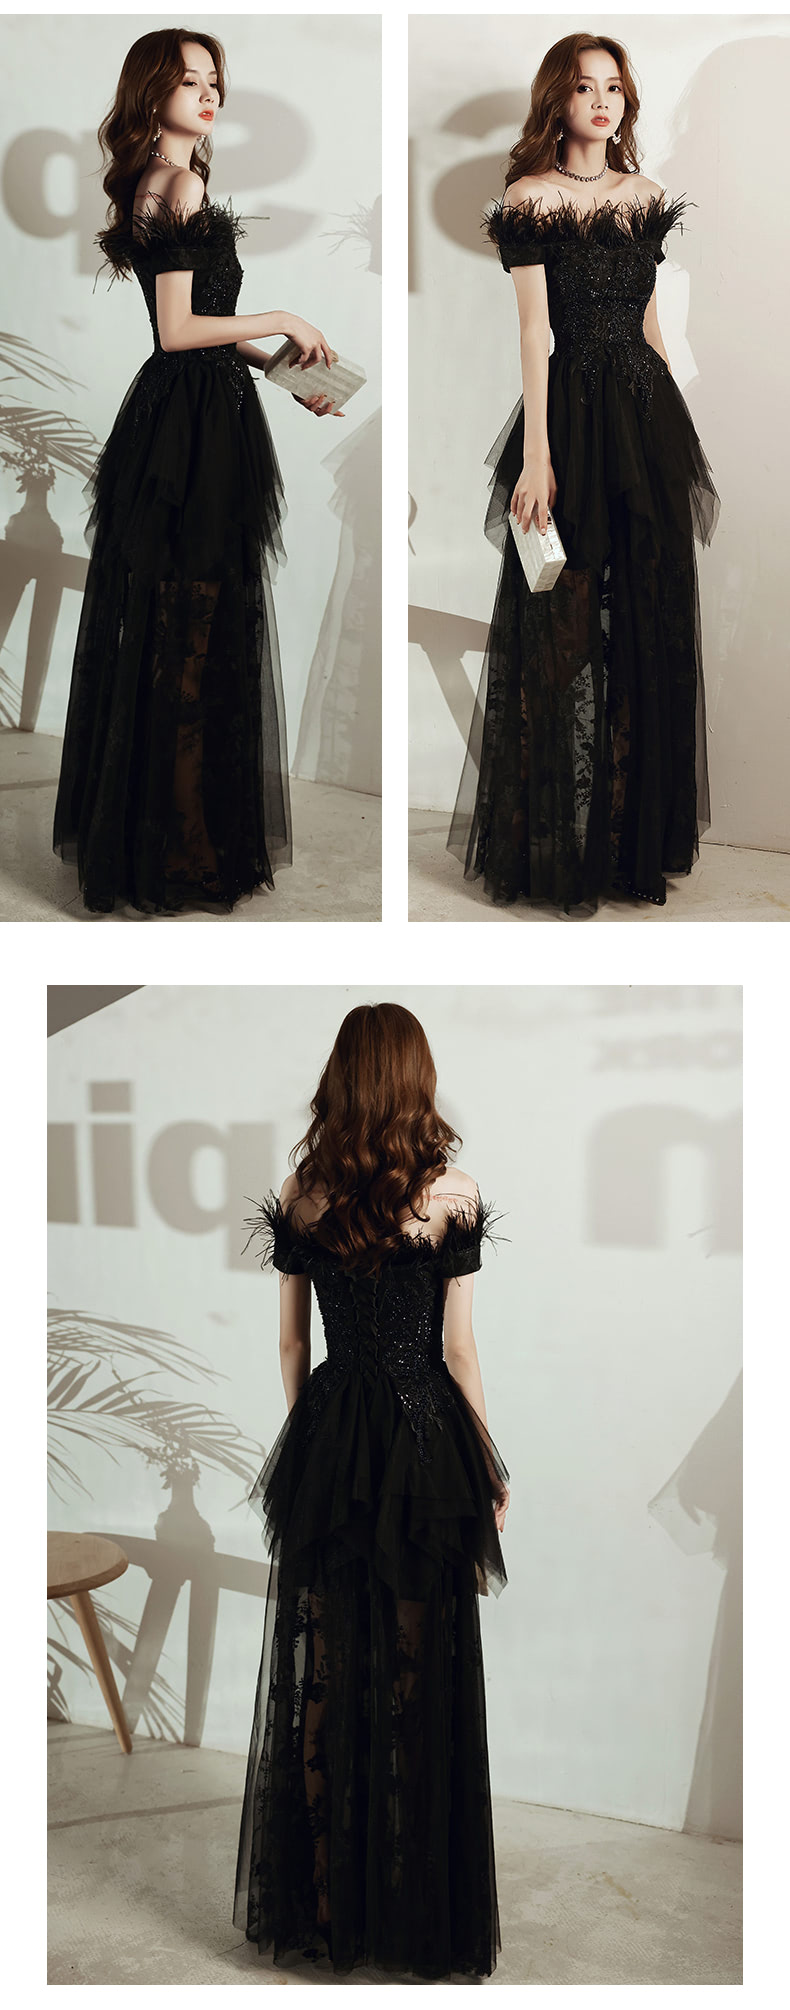 Luxury-Black-Feather-Cocktail-Prom-Dress-Evening-Party-Long-Gown14.jpg